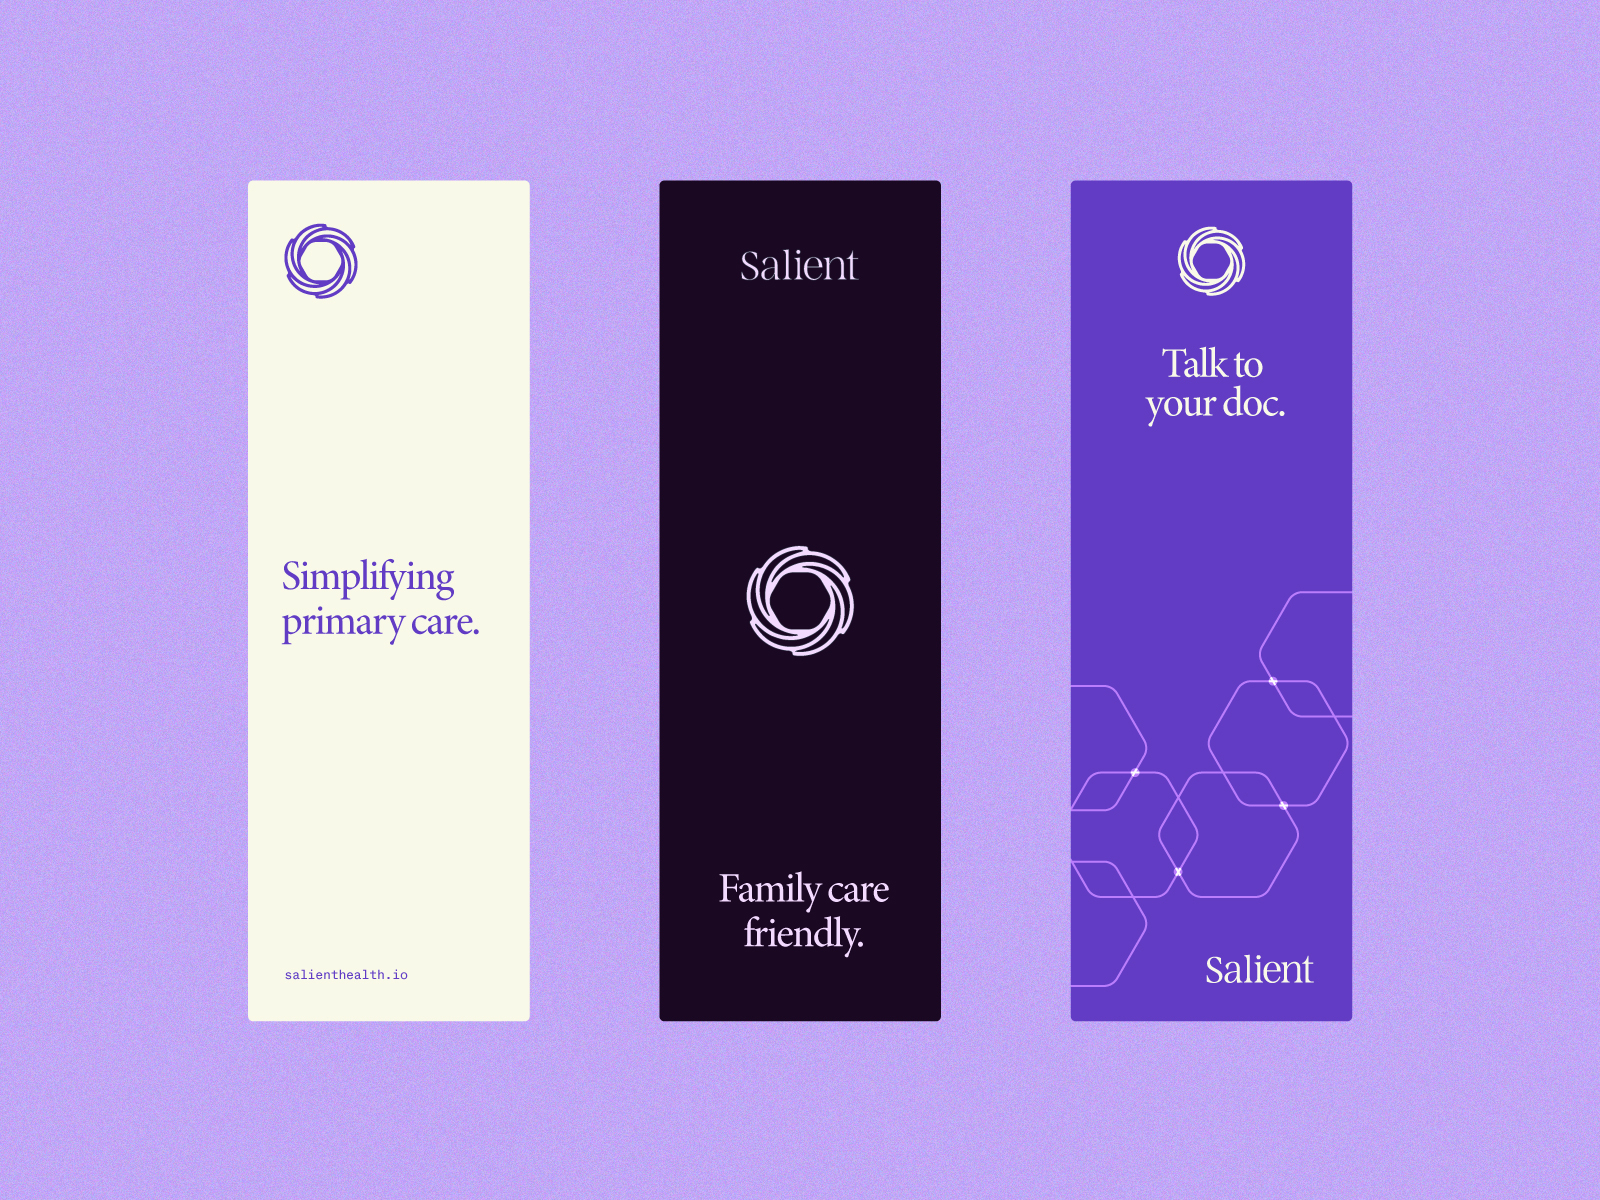 Salient | Banners by Wesley Marc Bancroft ᴸᵁᴺᴼᵁᴿ for Lunour on Dribbble